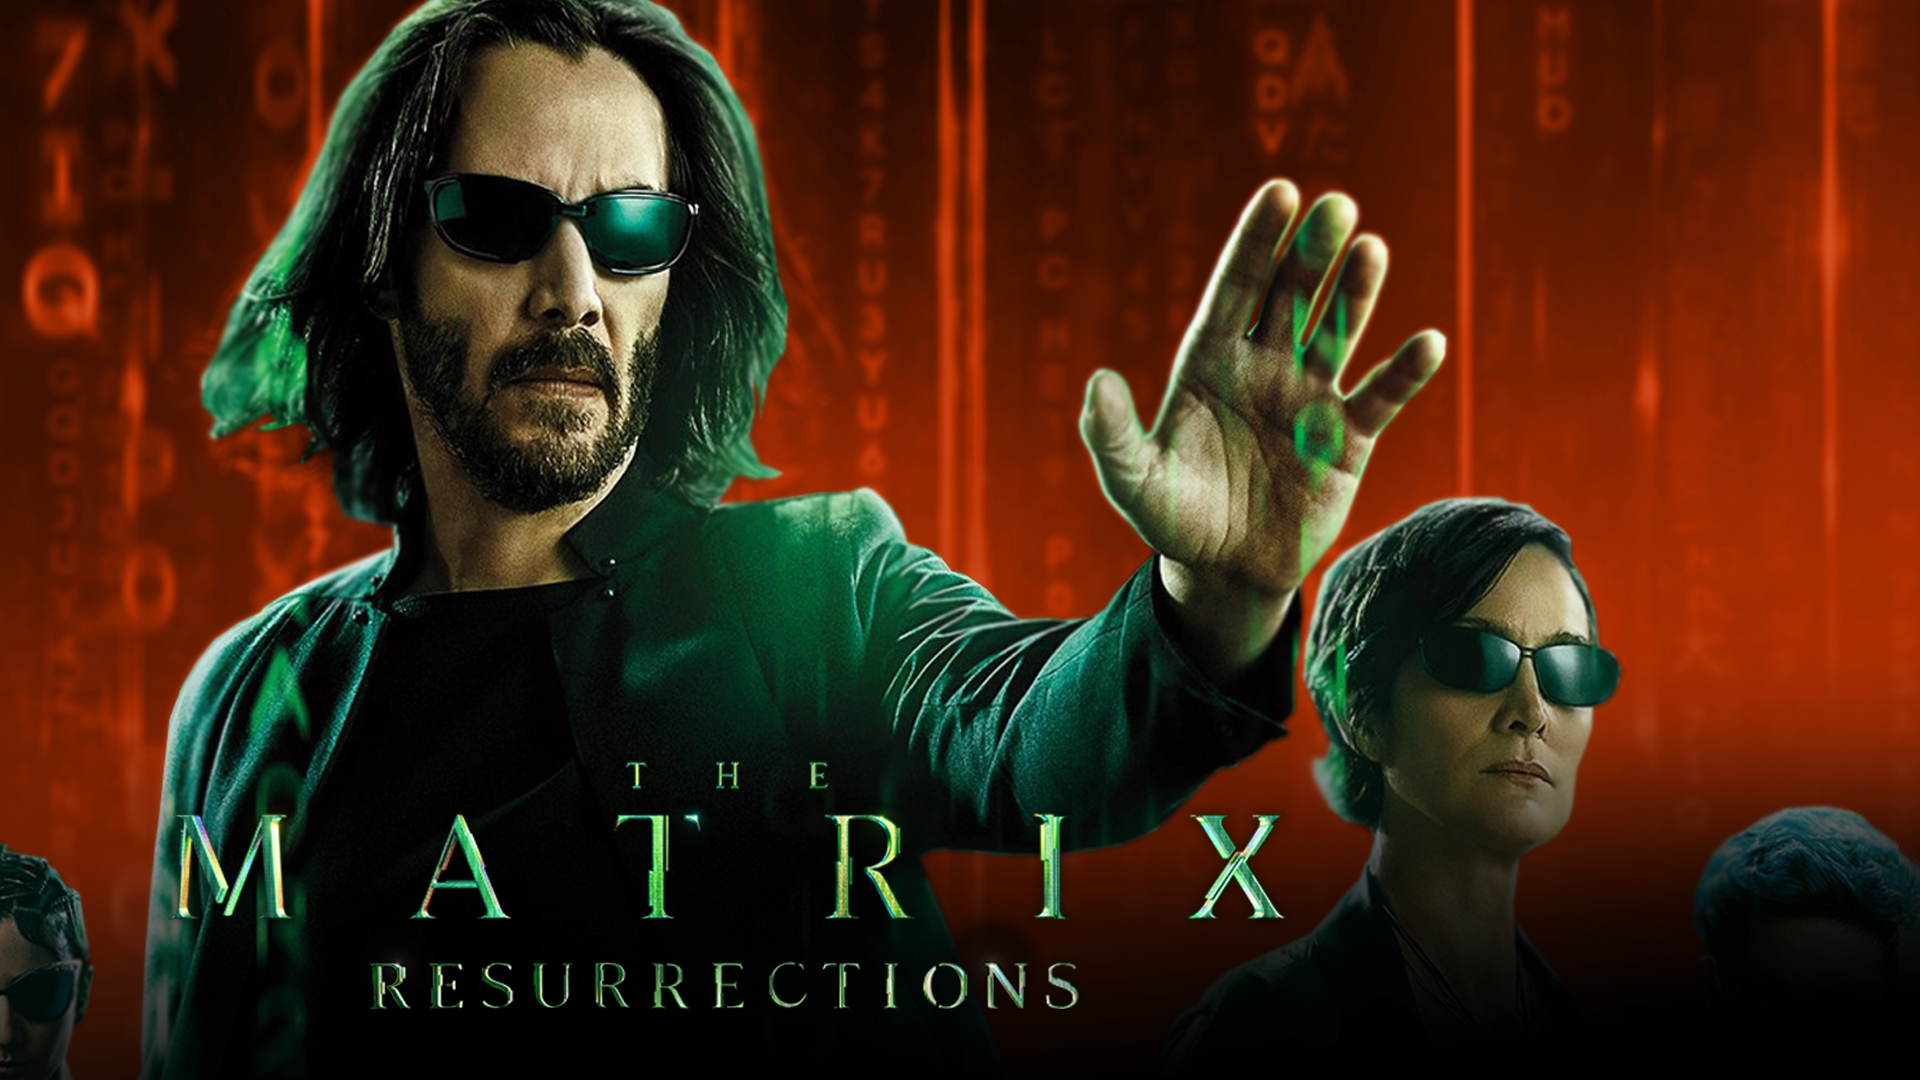 The Matrix Resurrections brings back the good and the bad